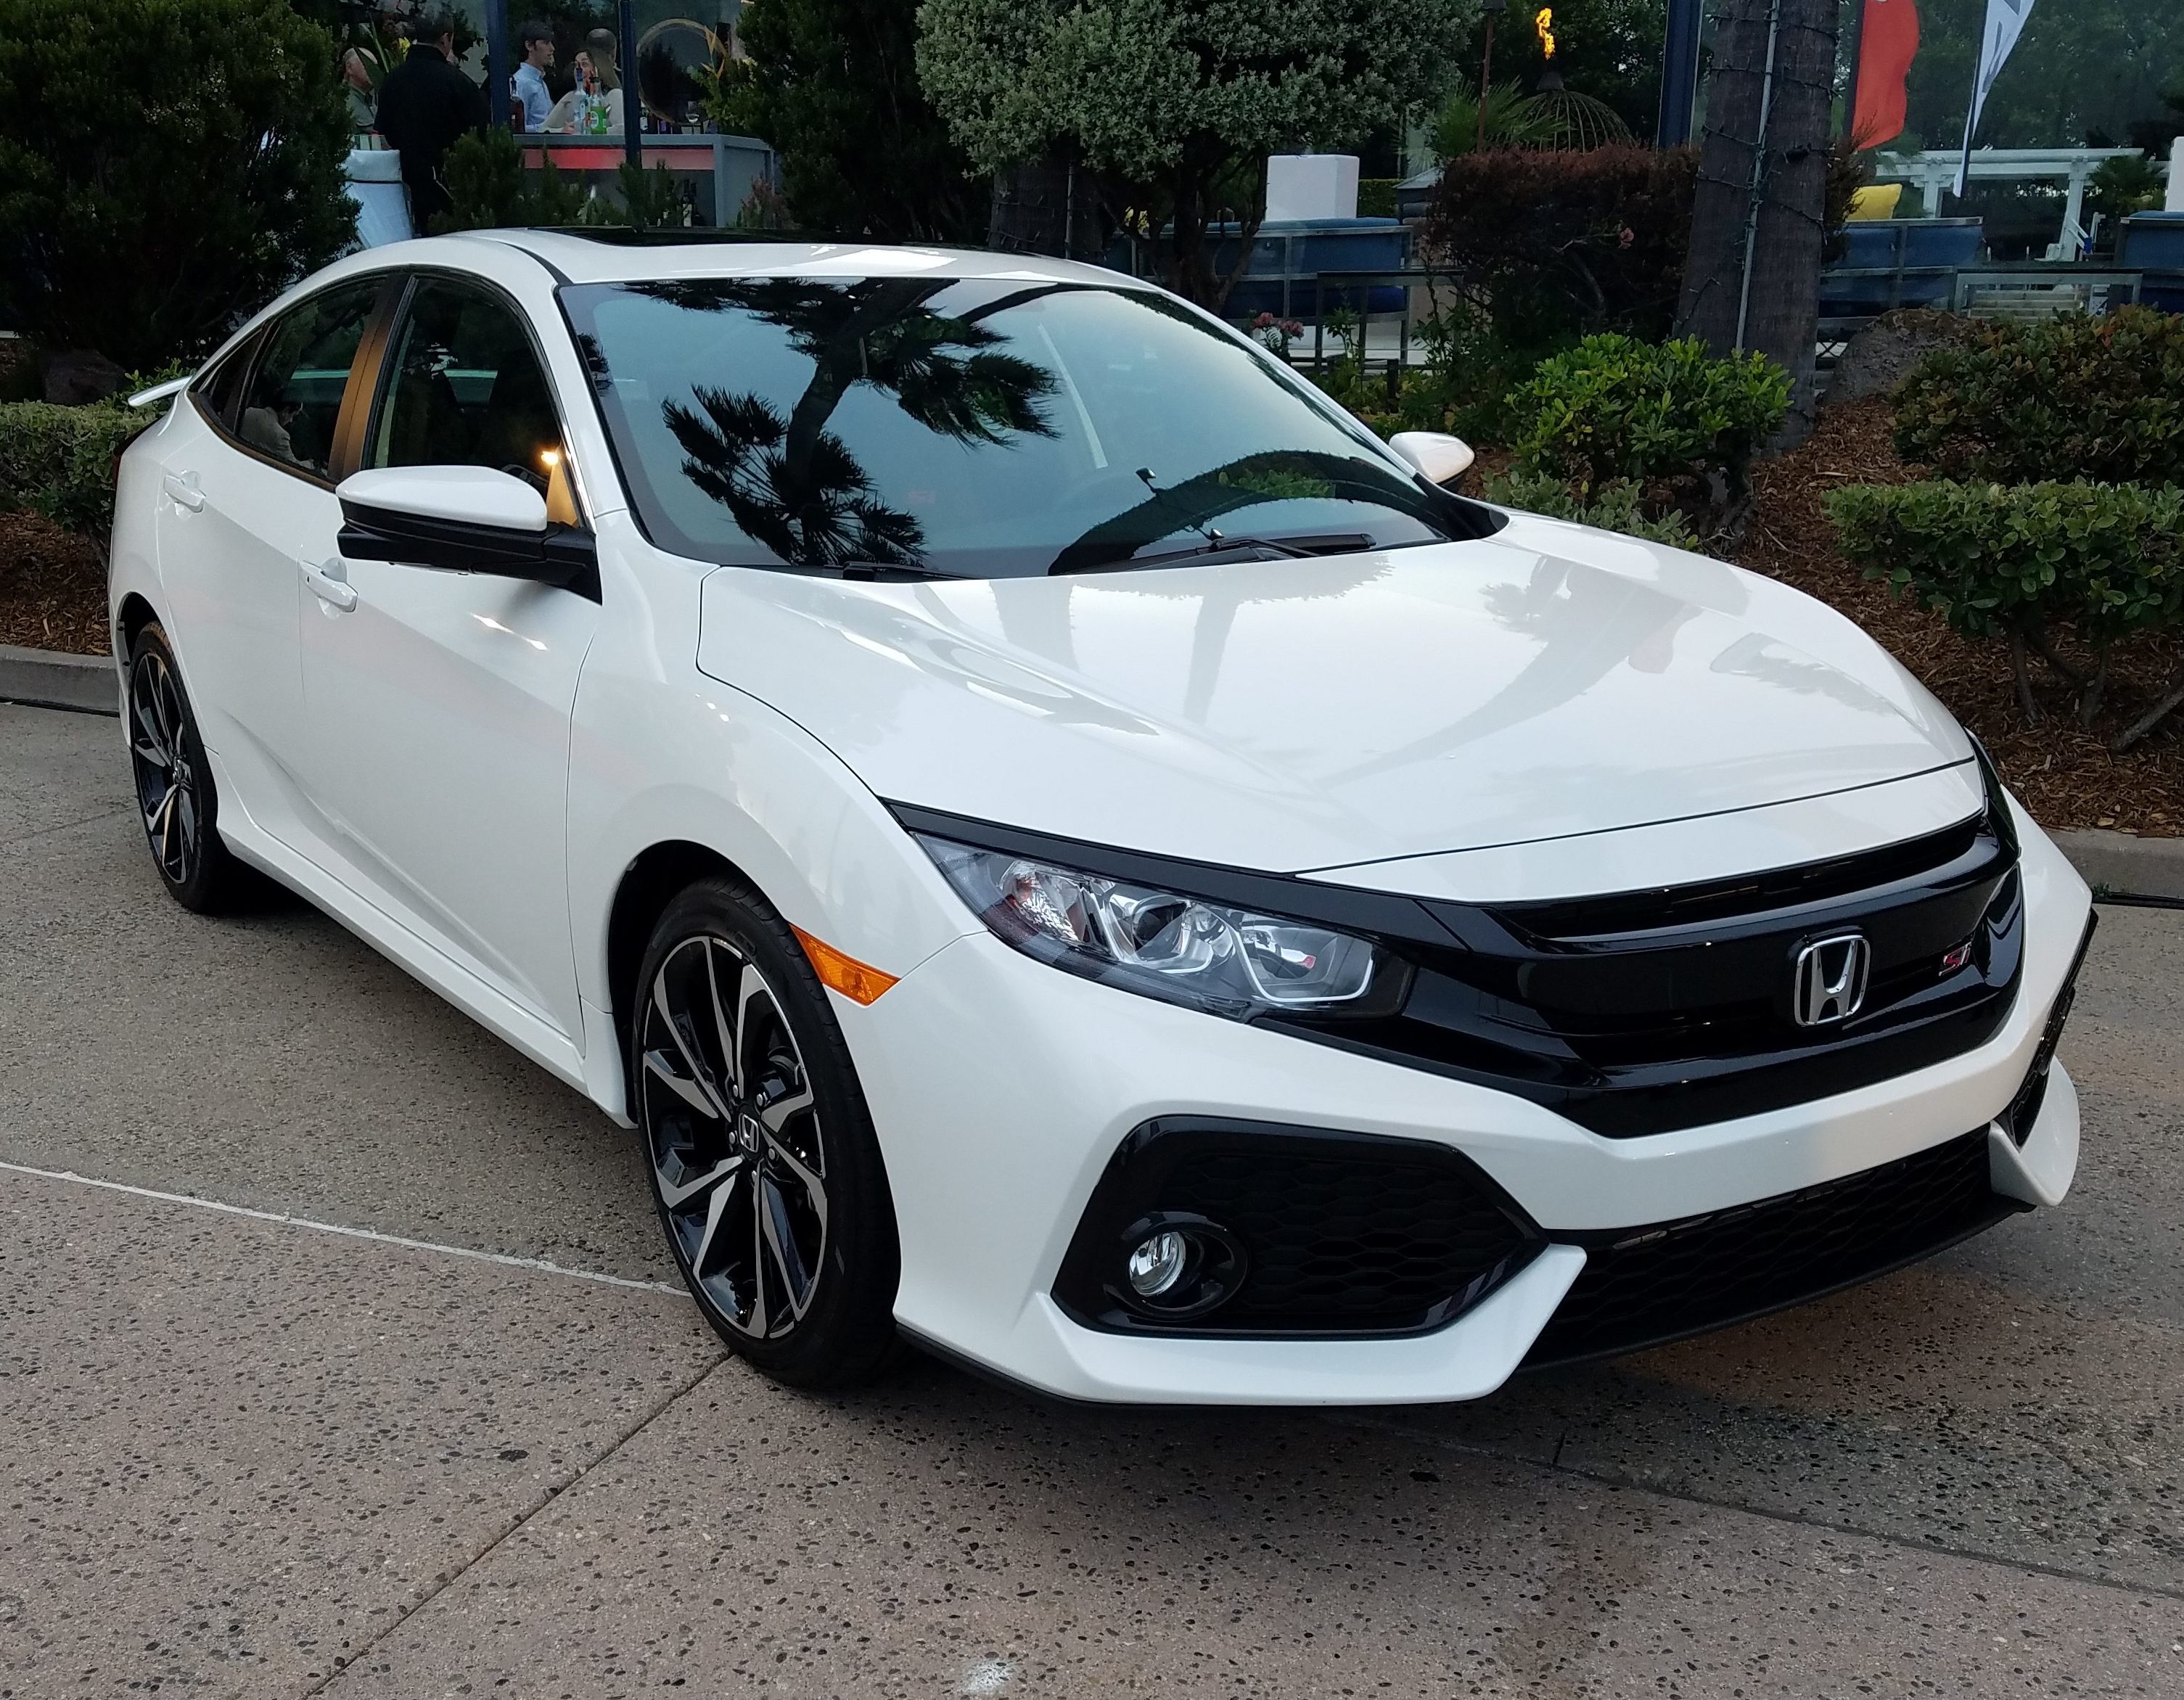 2017 Civic Si Review: Best Si Ever Made - Honda-Tech